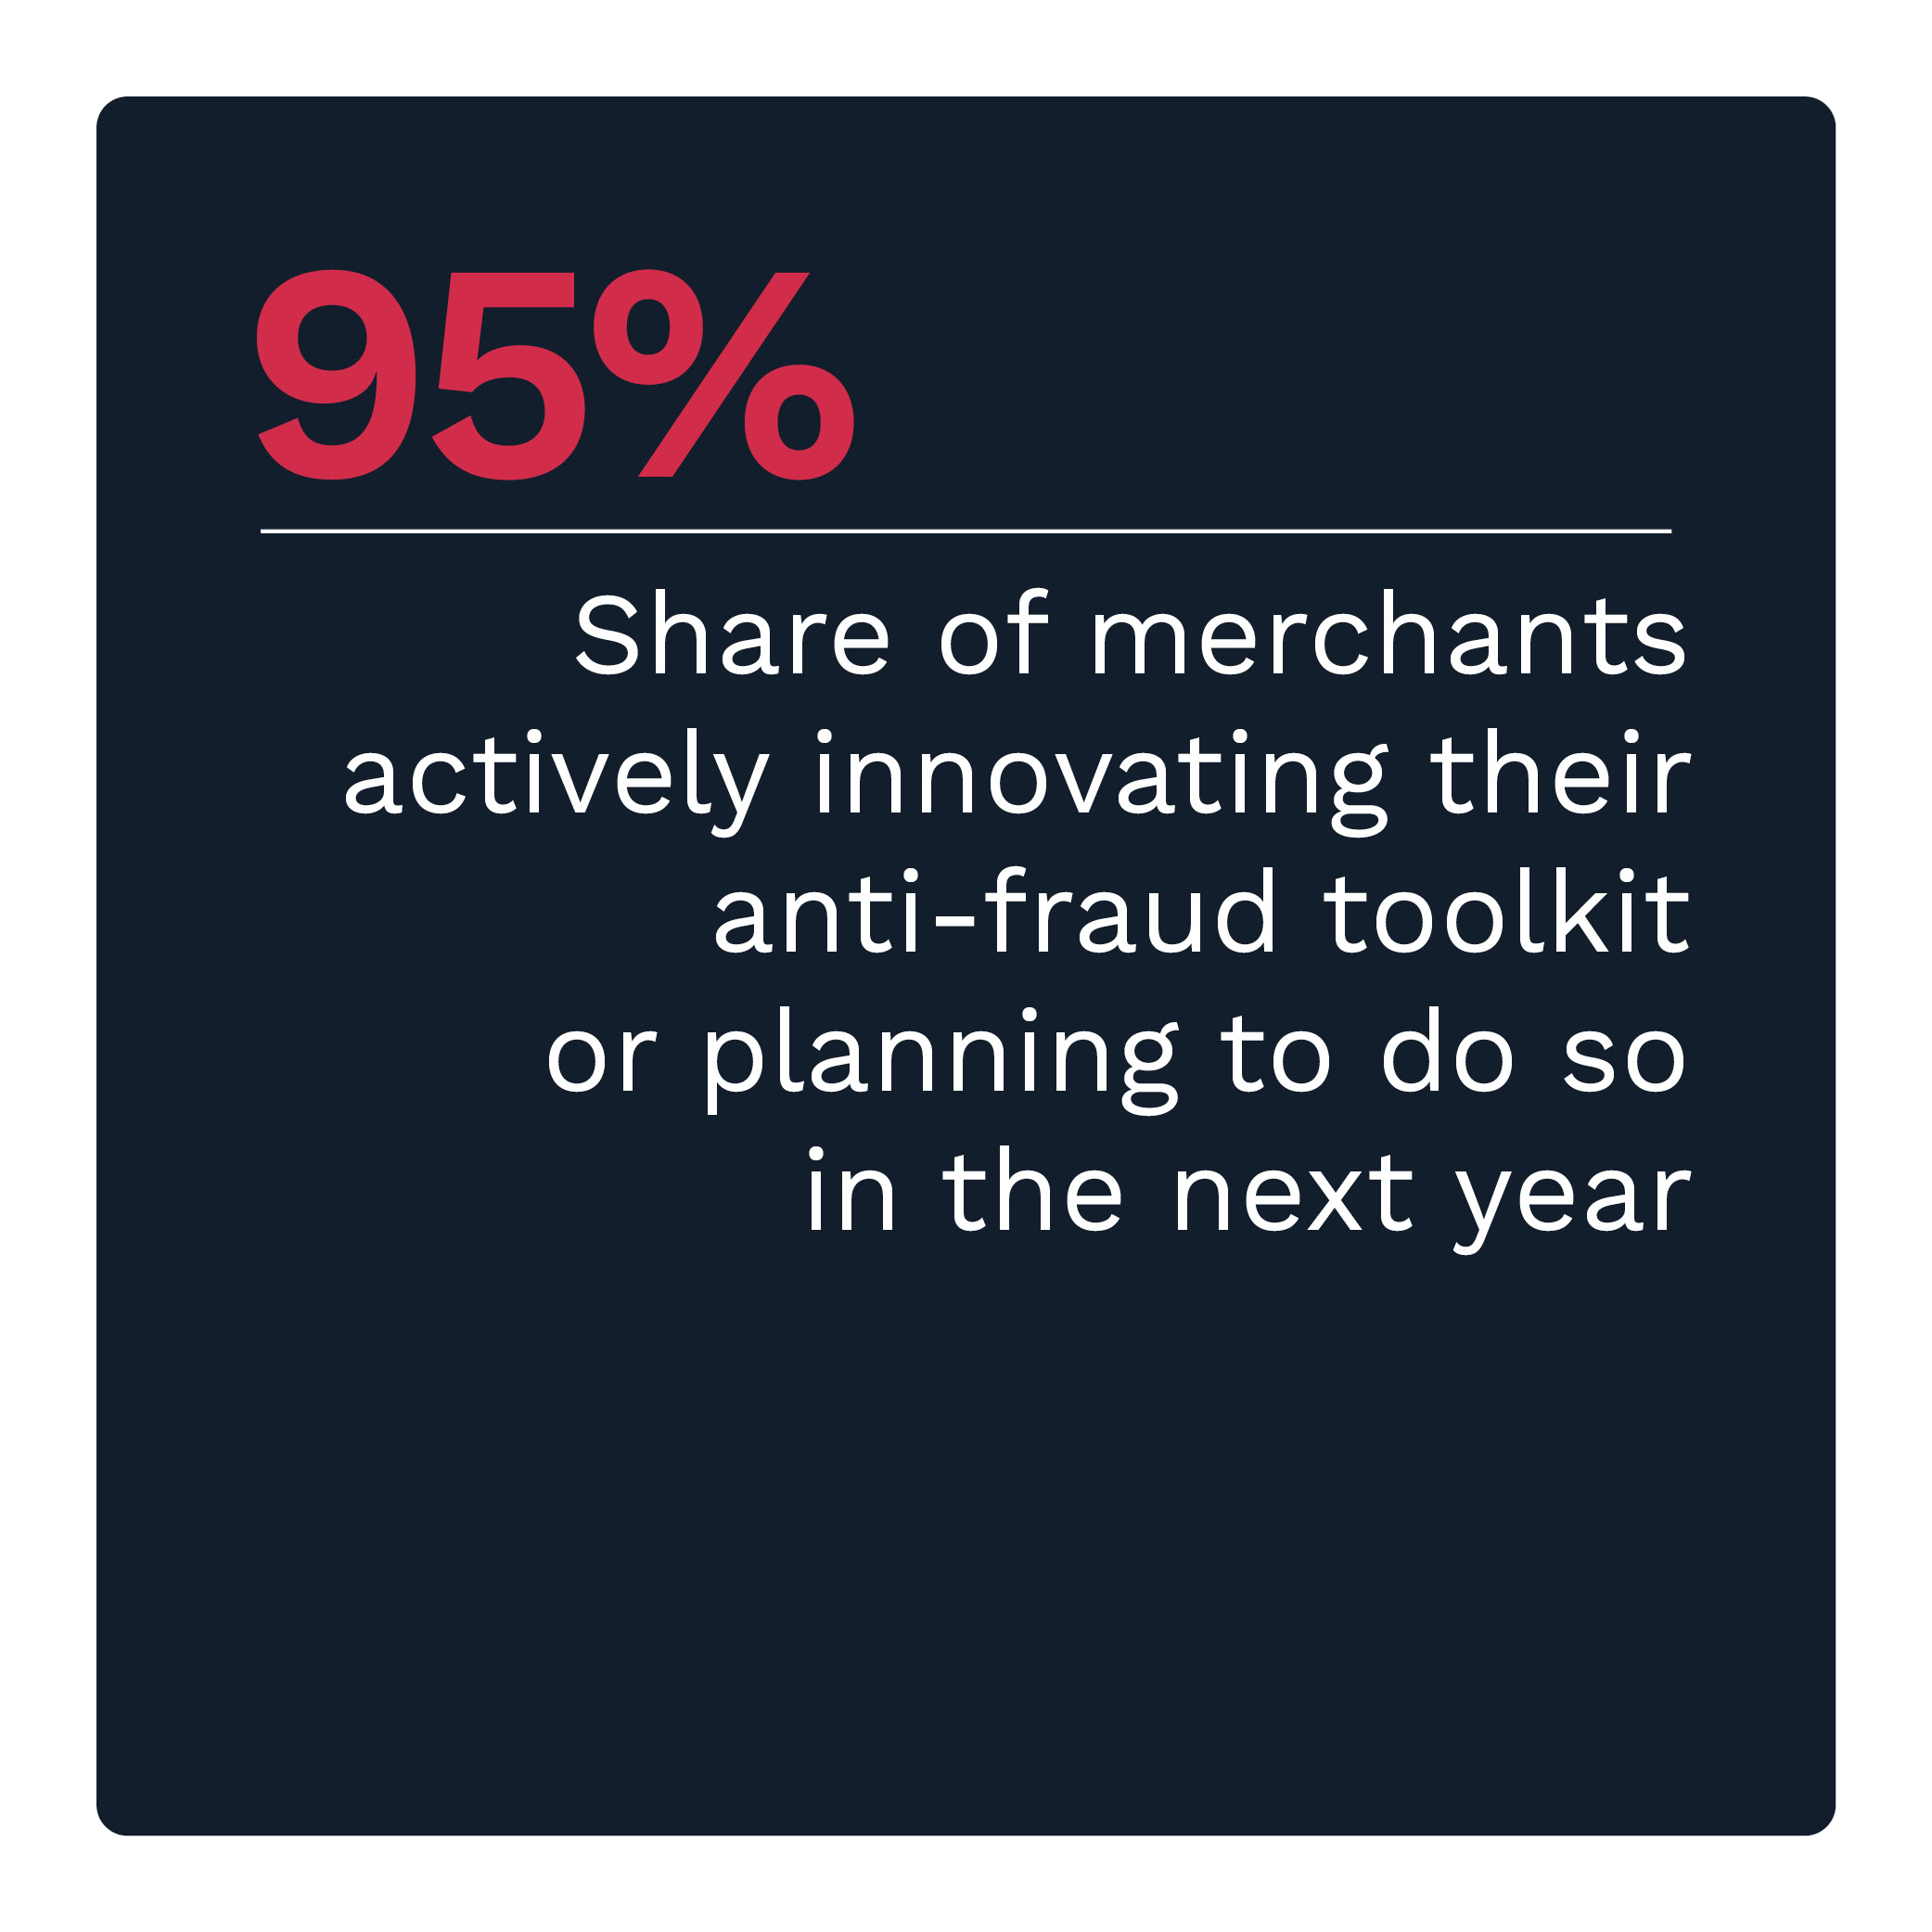 95%: Share of merchants actively innovating their anti-fraud toolkit or planning to do so in the next year